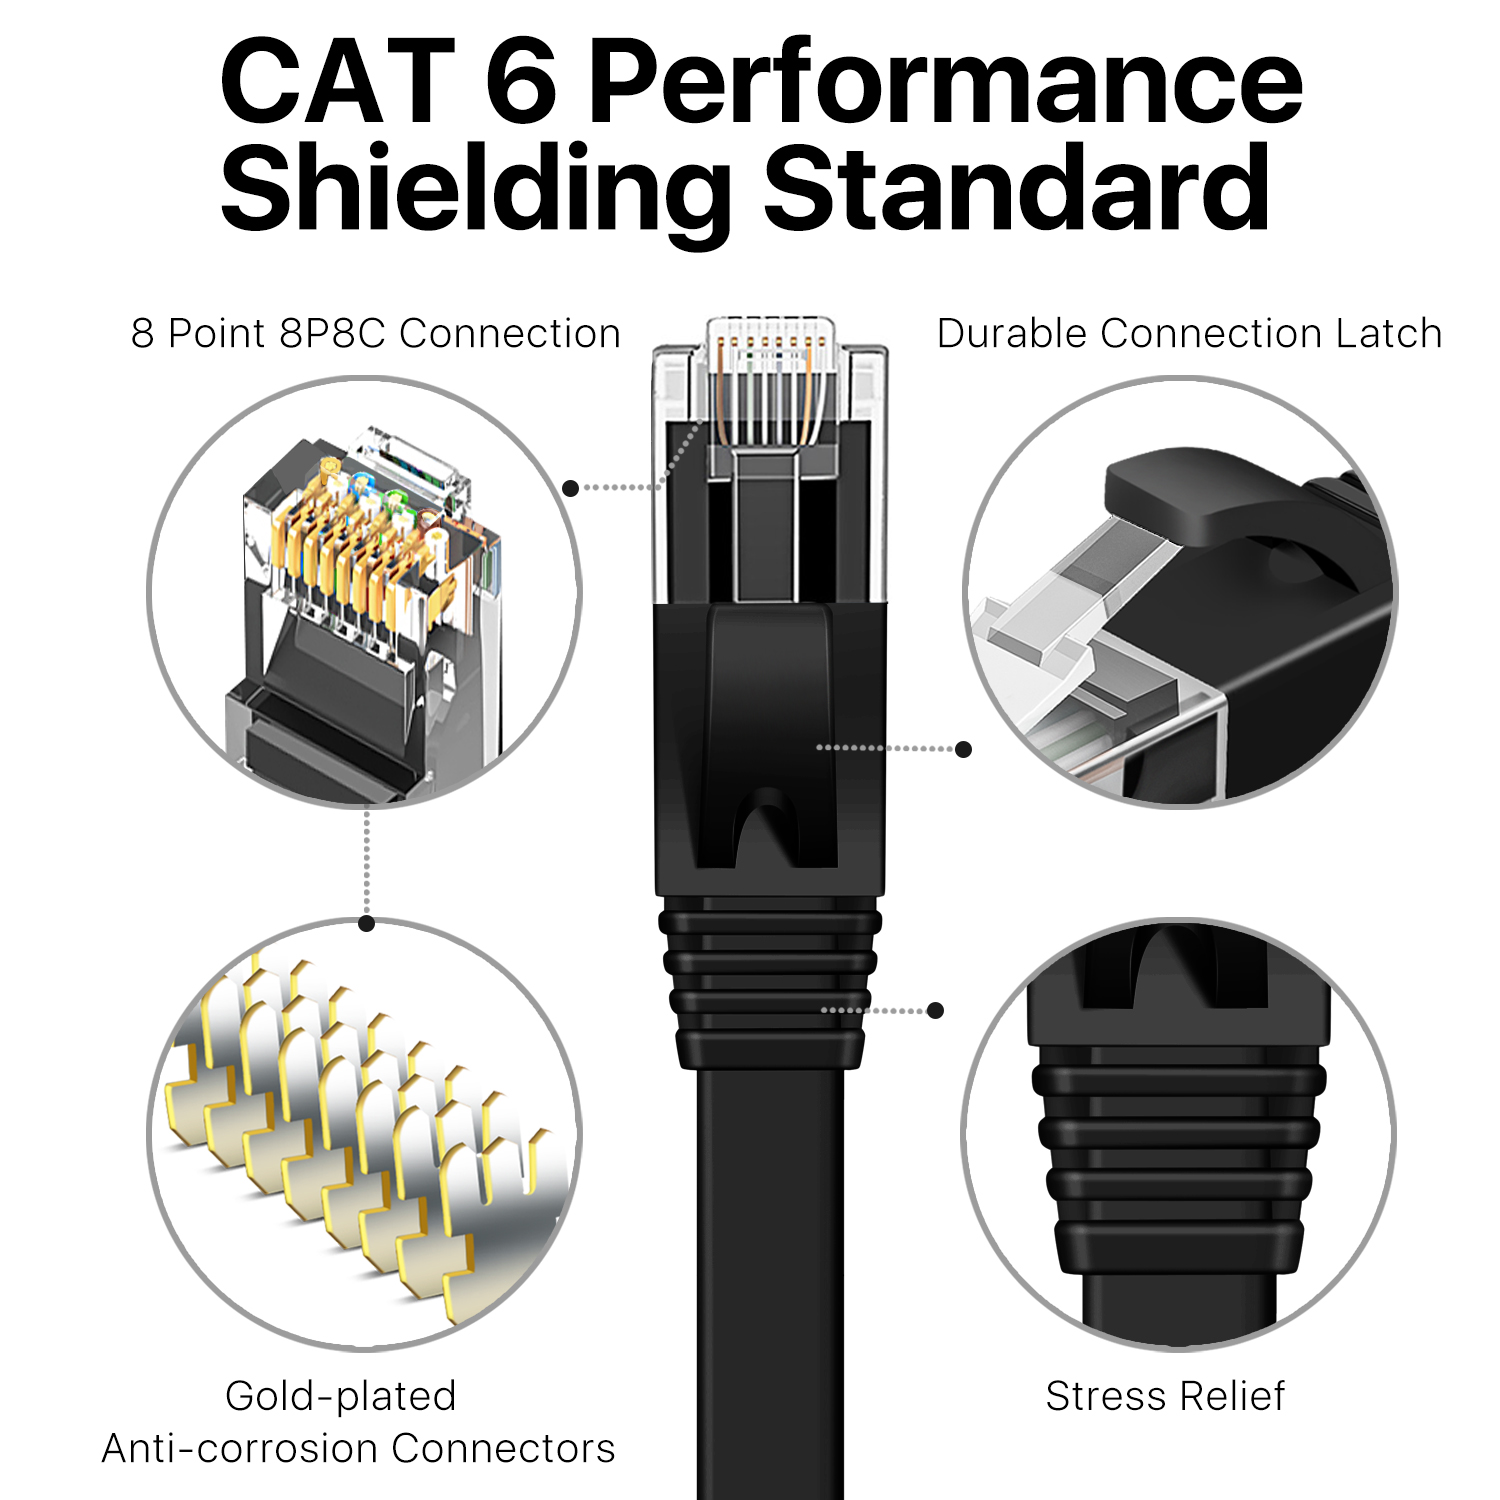 Premium Quality Materials - Solid 24 AWG copper filaments, PE insulation molding that prevents internet cable signal interference; molded strain-relief boots, and snagless molds for a secure and reliable connection.